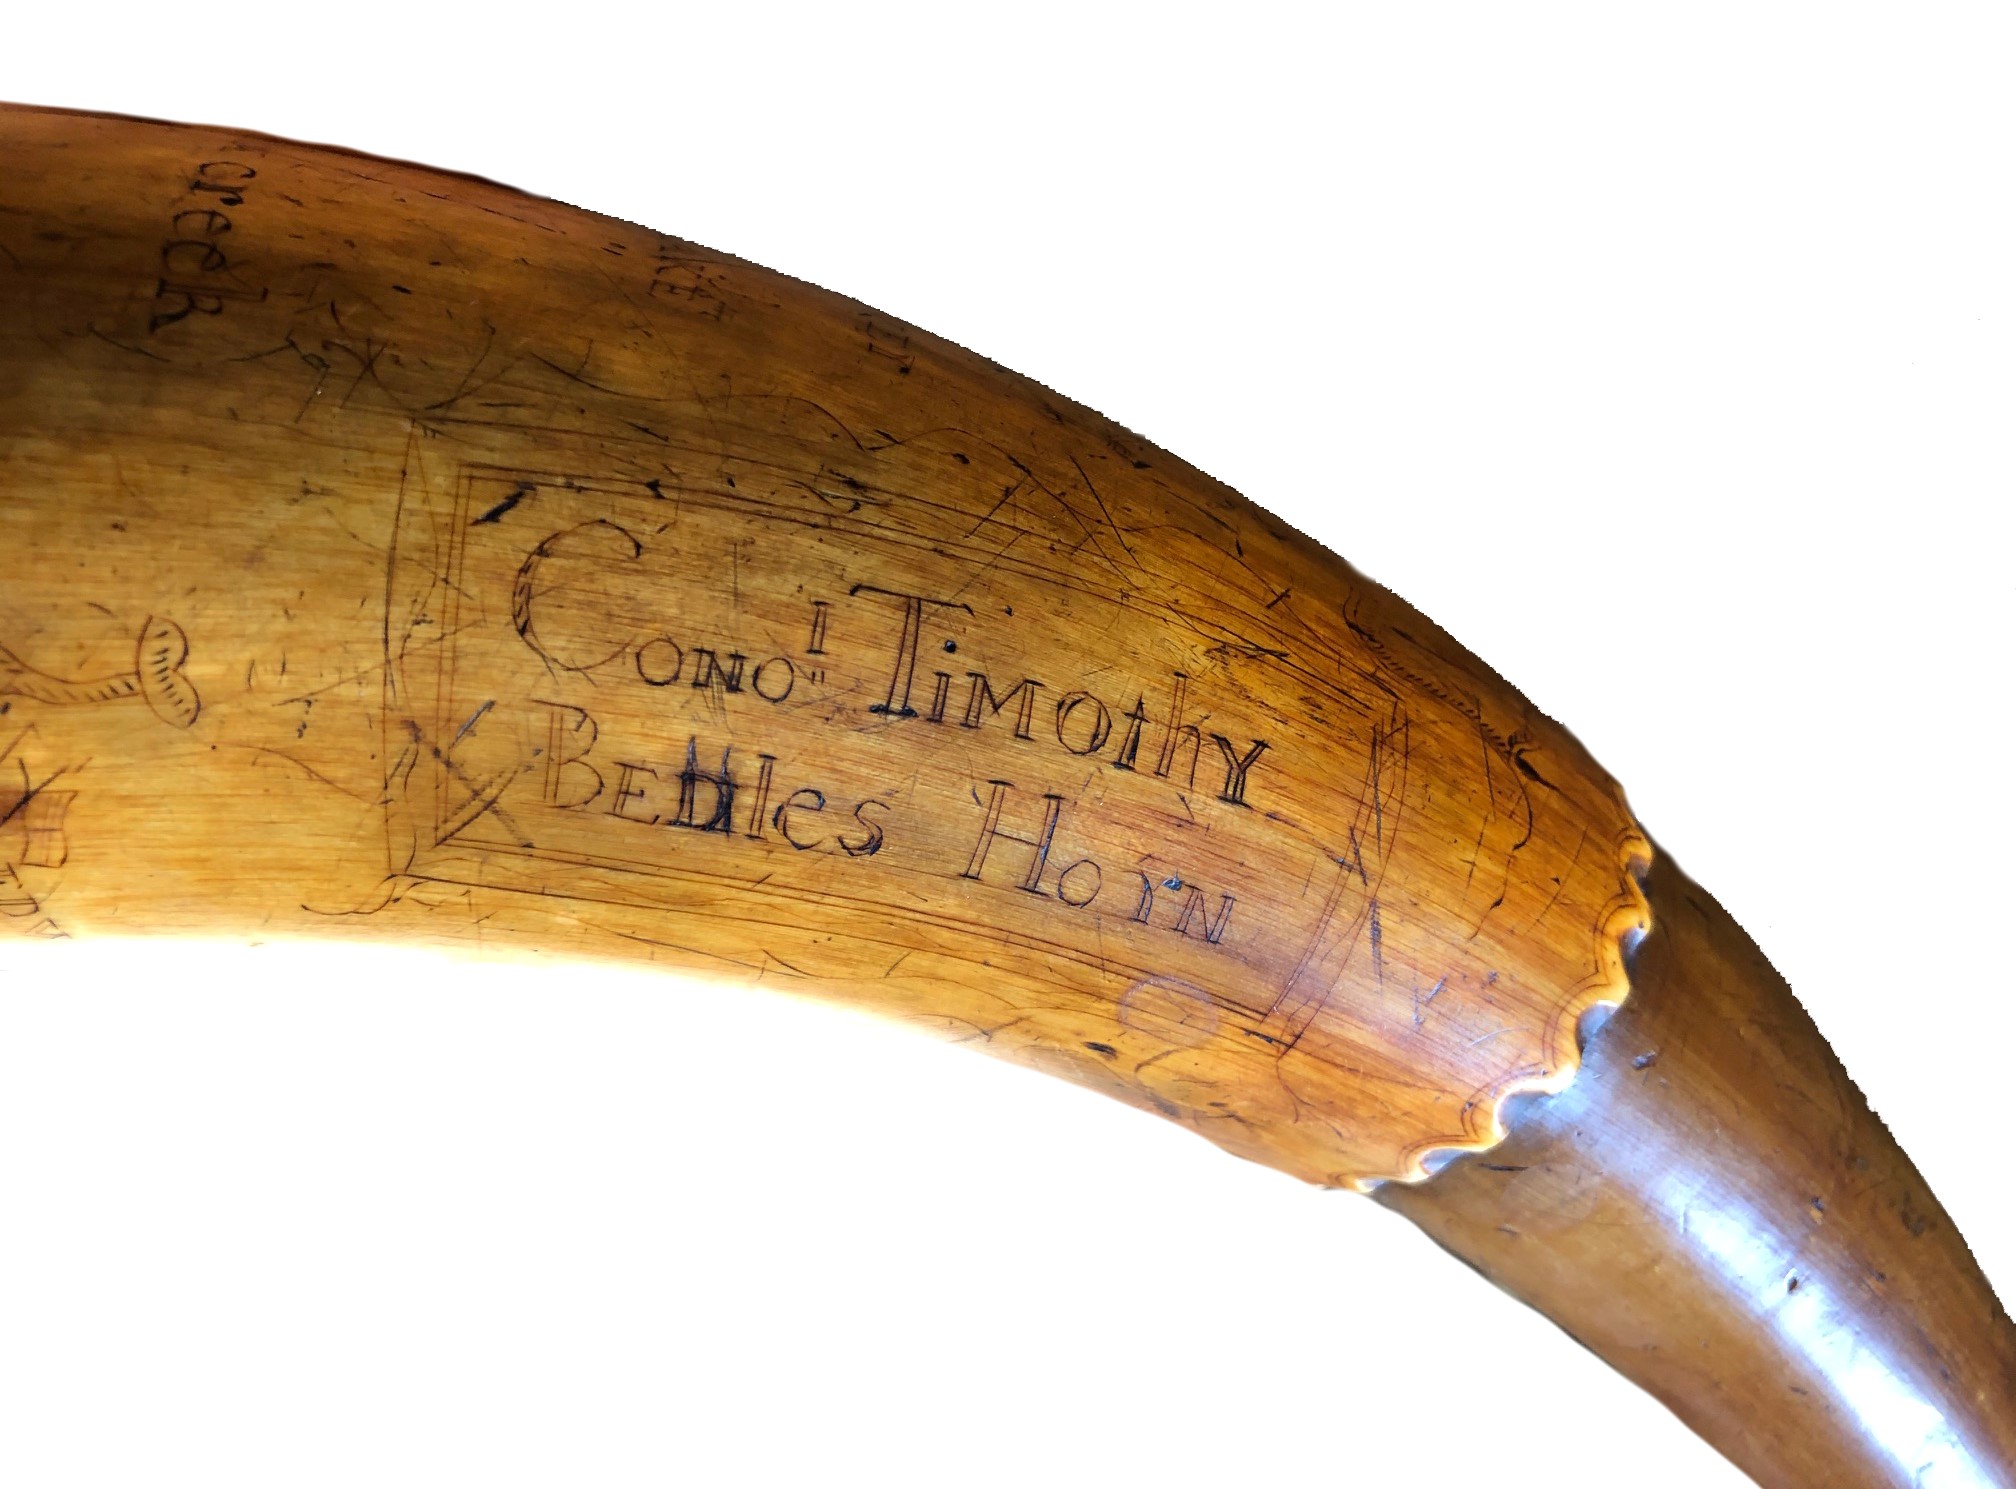 MAP POWDER HORN OF COL. TIMOTHY